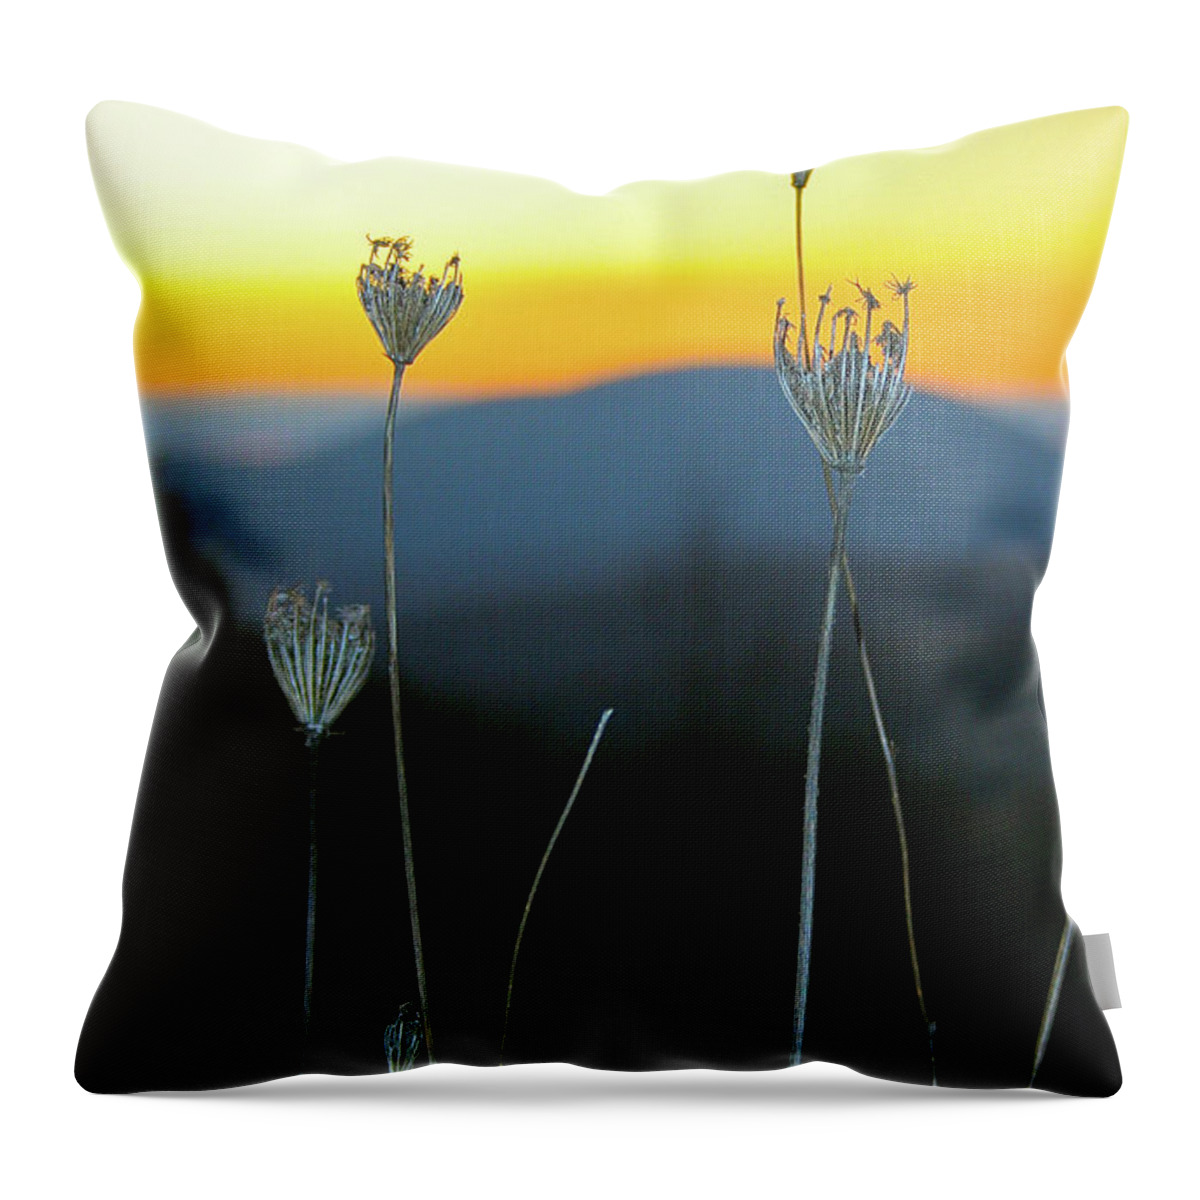 Queen Anne's Lace Throw Pillow featuring the photograph Queen Anne's Lace Sunrise I by Karen Jorstad